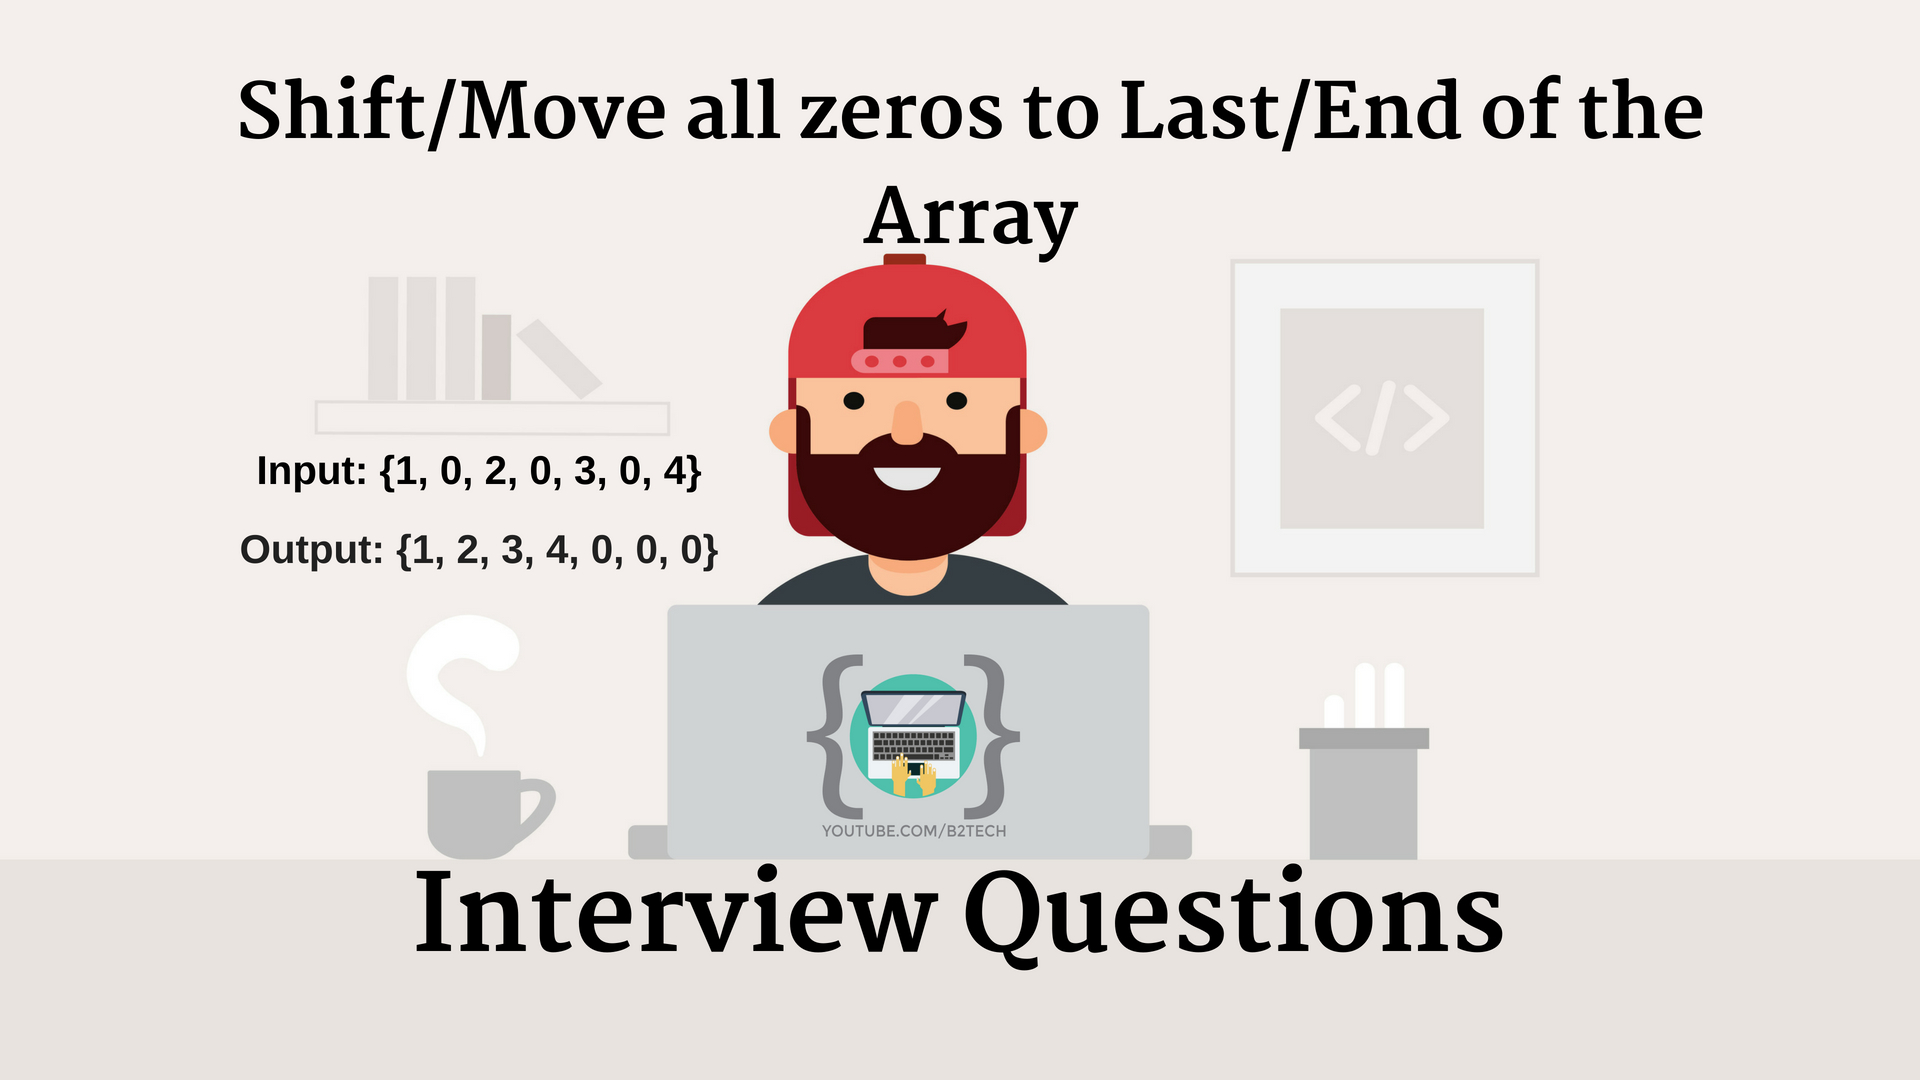 You are currently viewing Move all zeros to last/end in the array